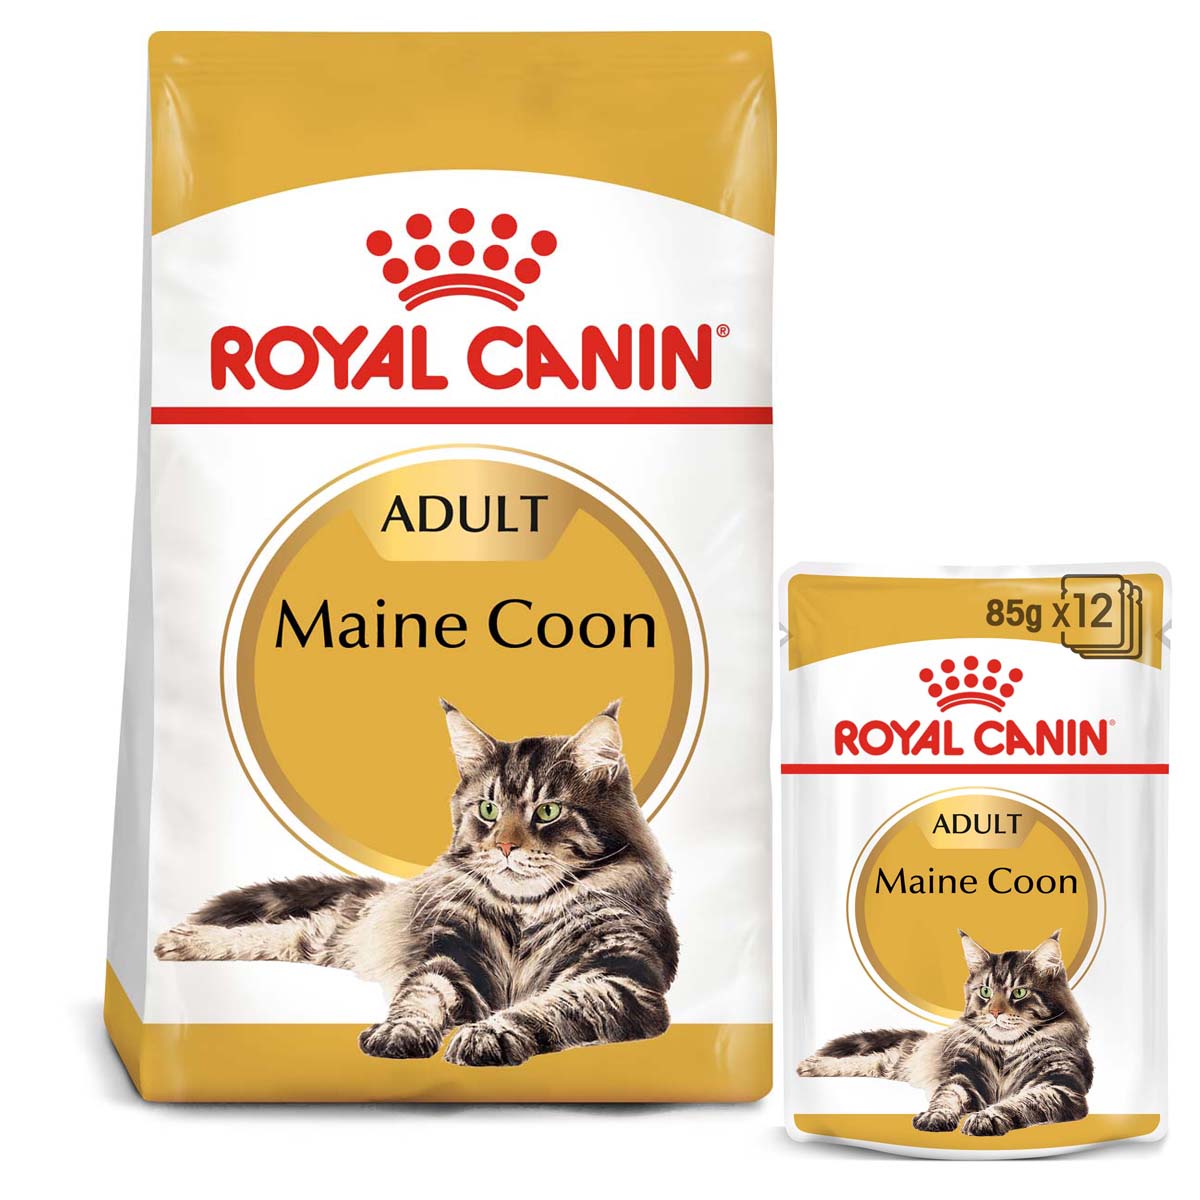 ROYAL CANIN ADULT Maine Coon 10kg + Nassfutter in Soße 48x85g von Royal Canin